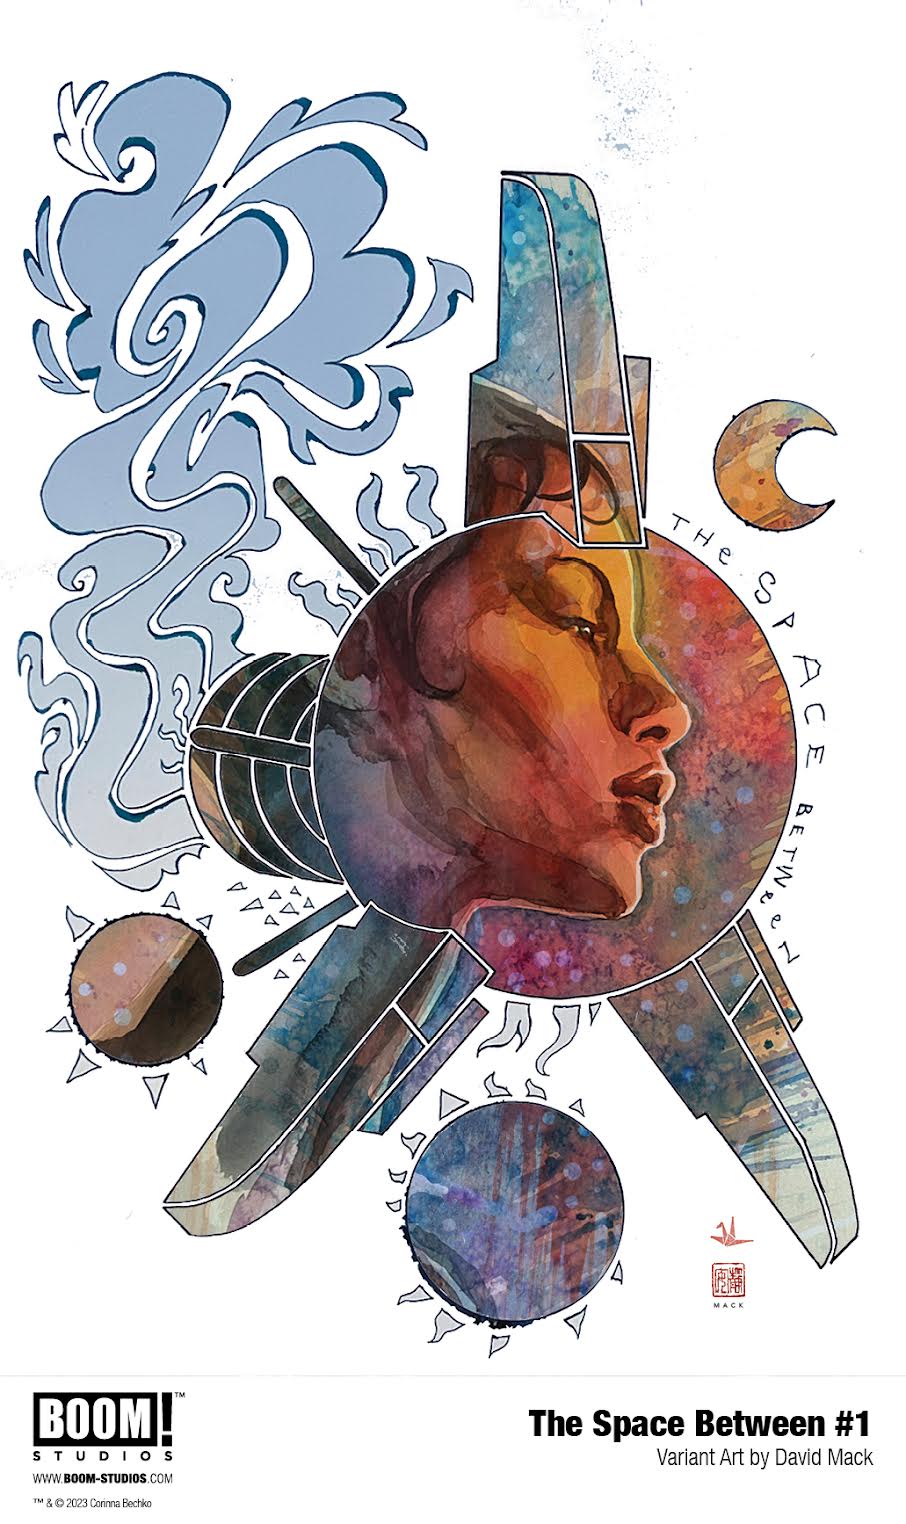 artwork showing a stylized spacecraft with a woman's head filling up most of its interior space cruising against a white background with several planets in it.